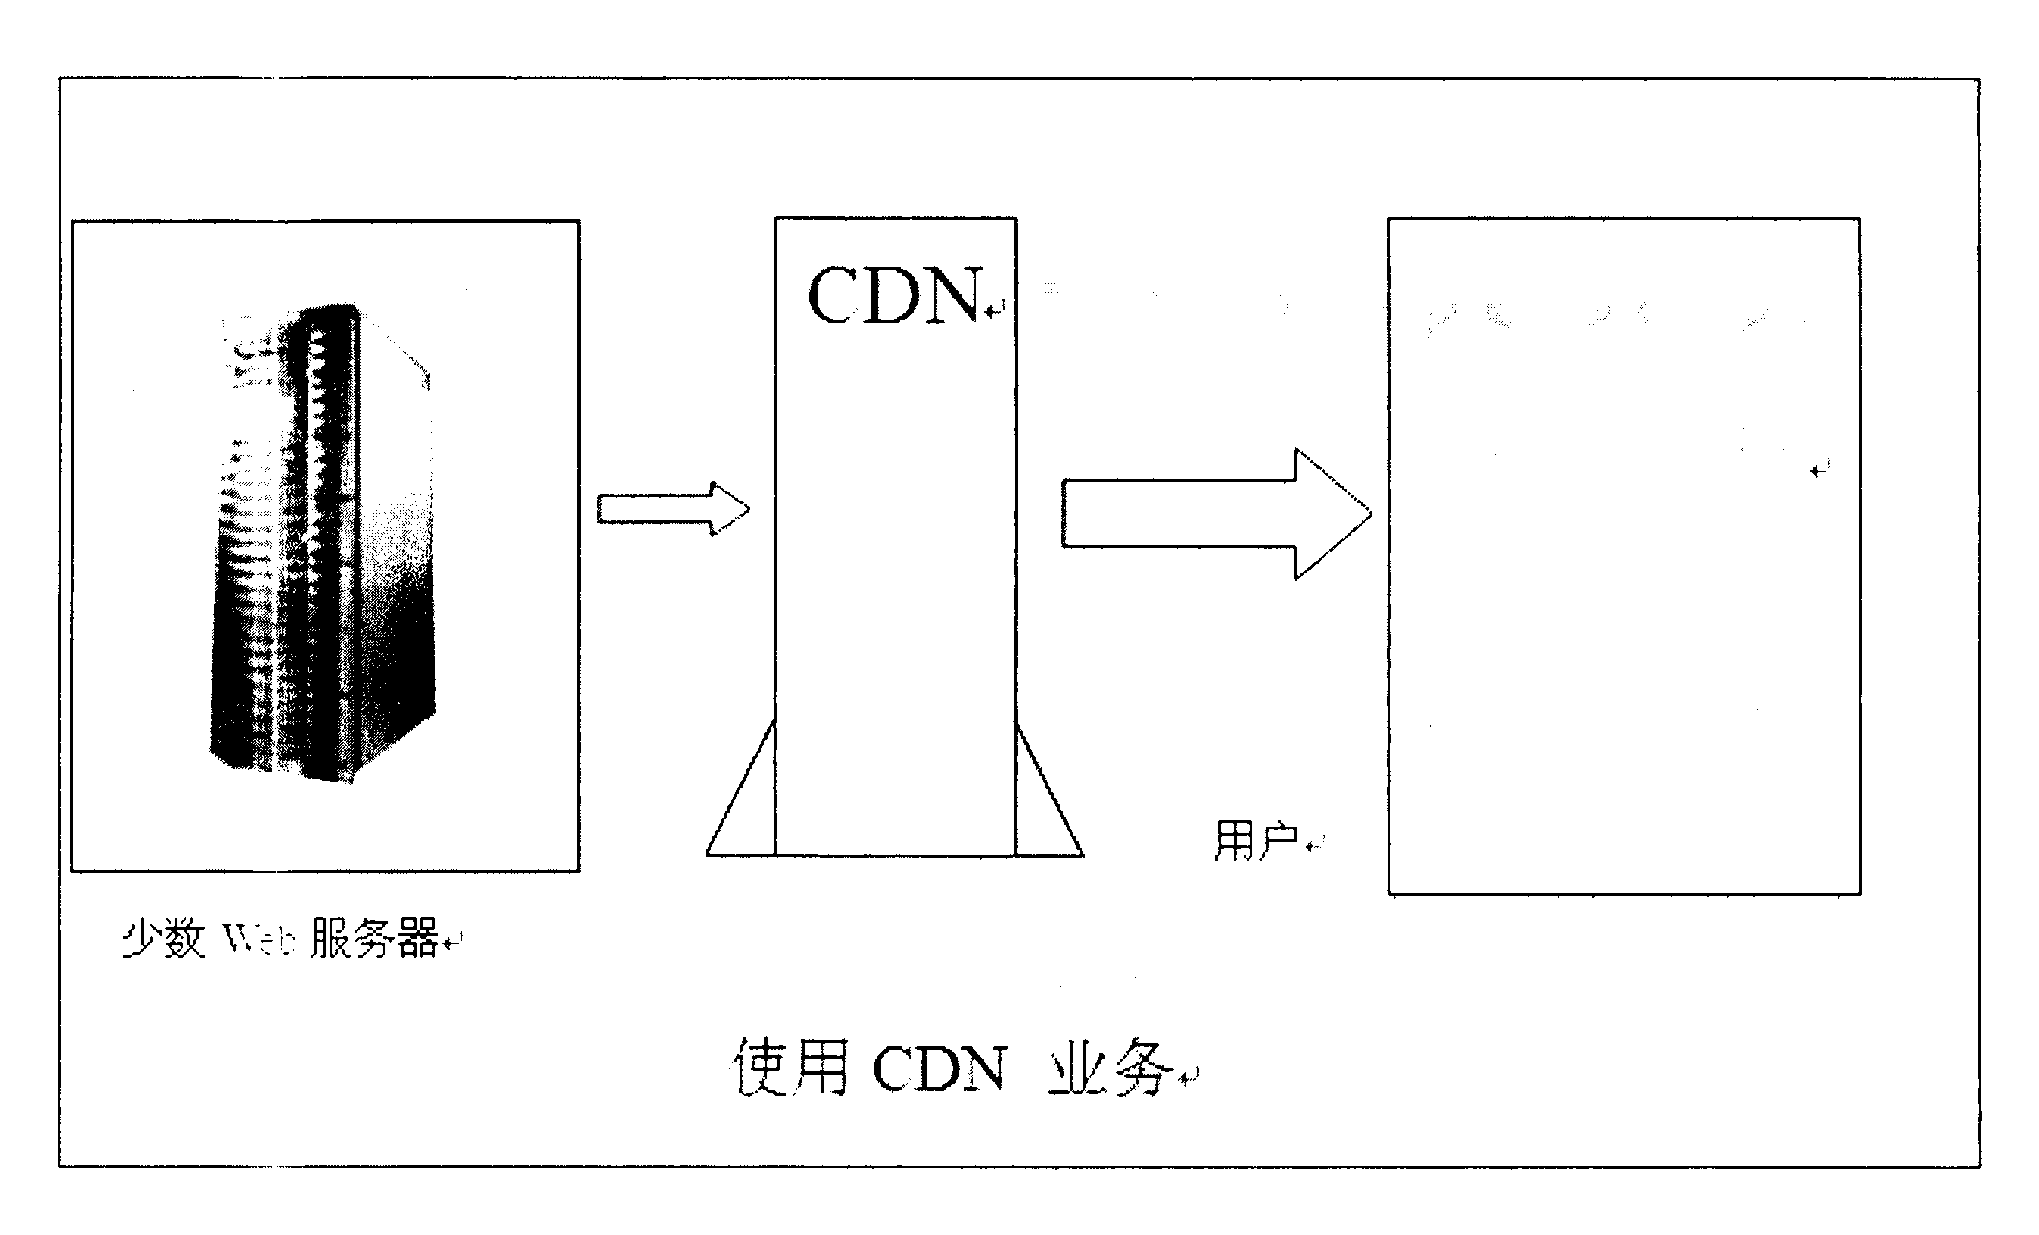 Method for achieving network acceleration by using content delivery network (CND) technique based on integration of three networks